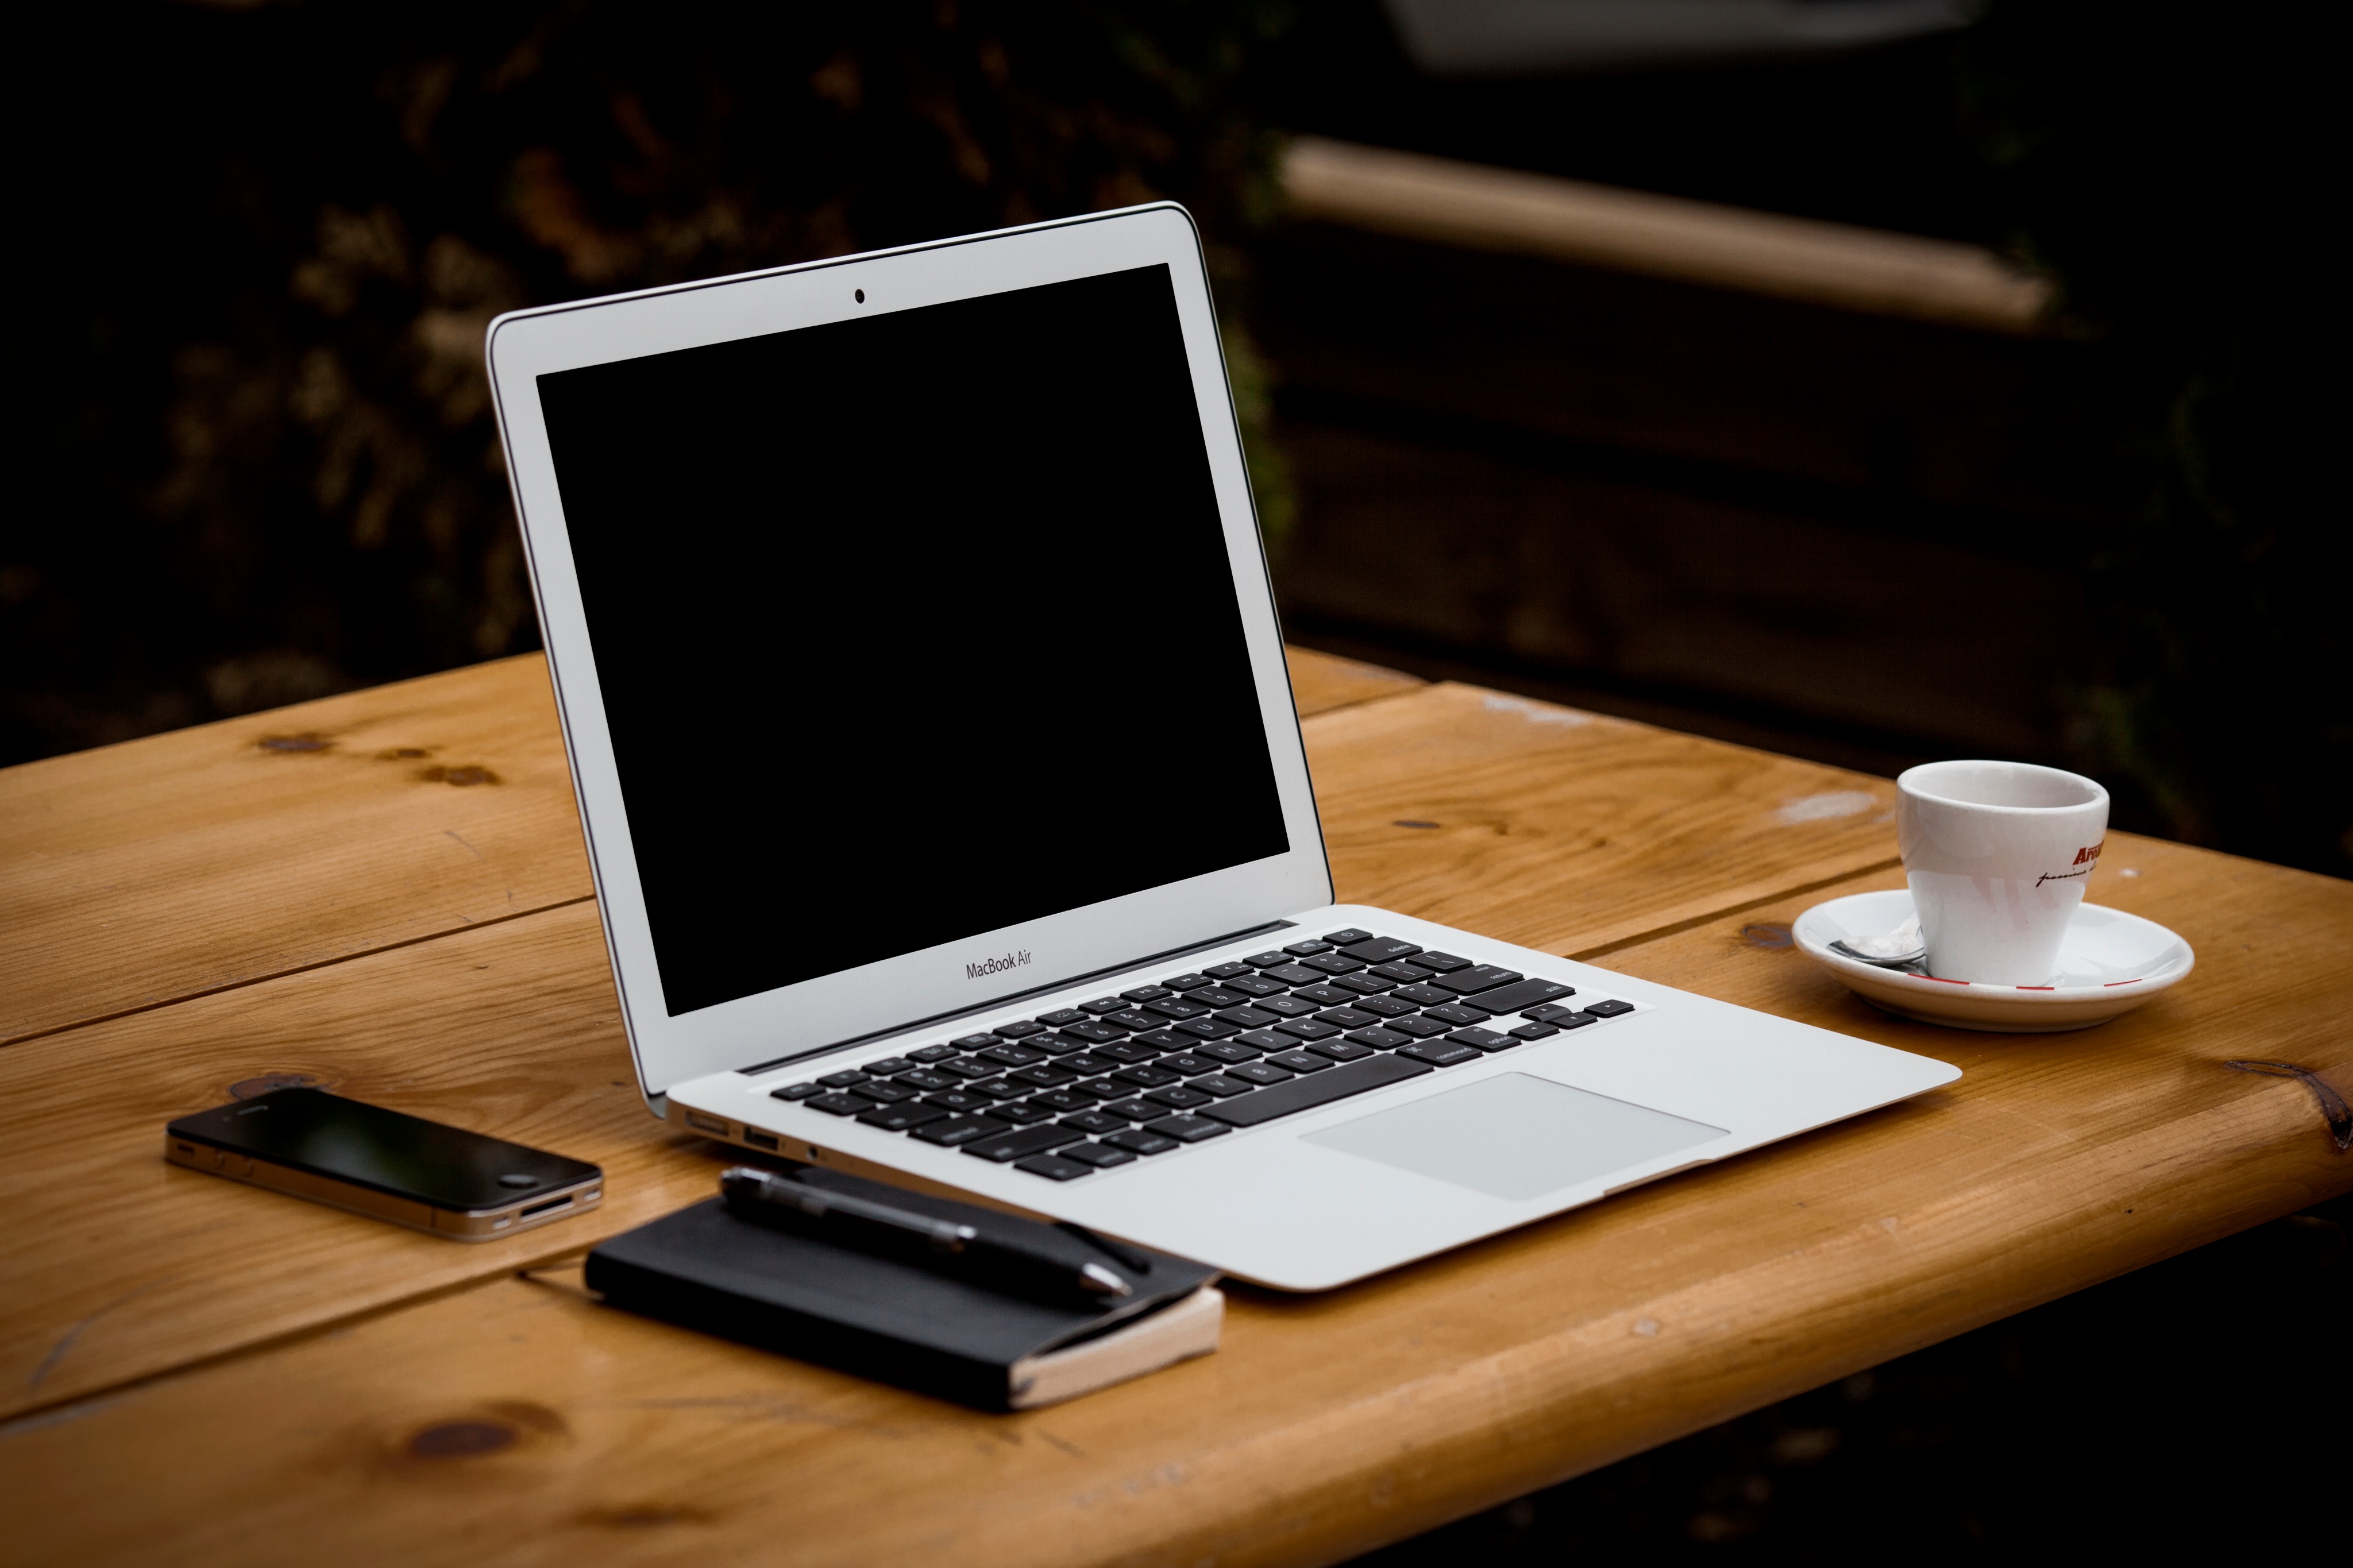 A laptop, a notebook, a phone, and a coffee cup atop a wooden table